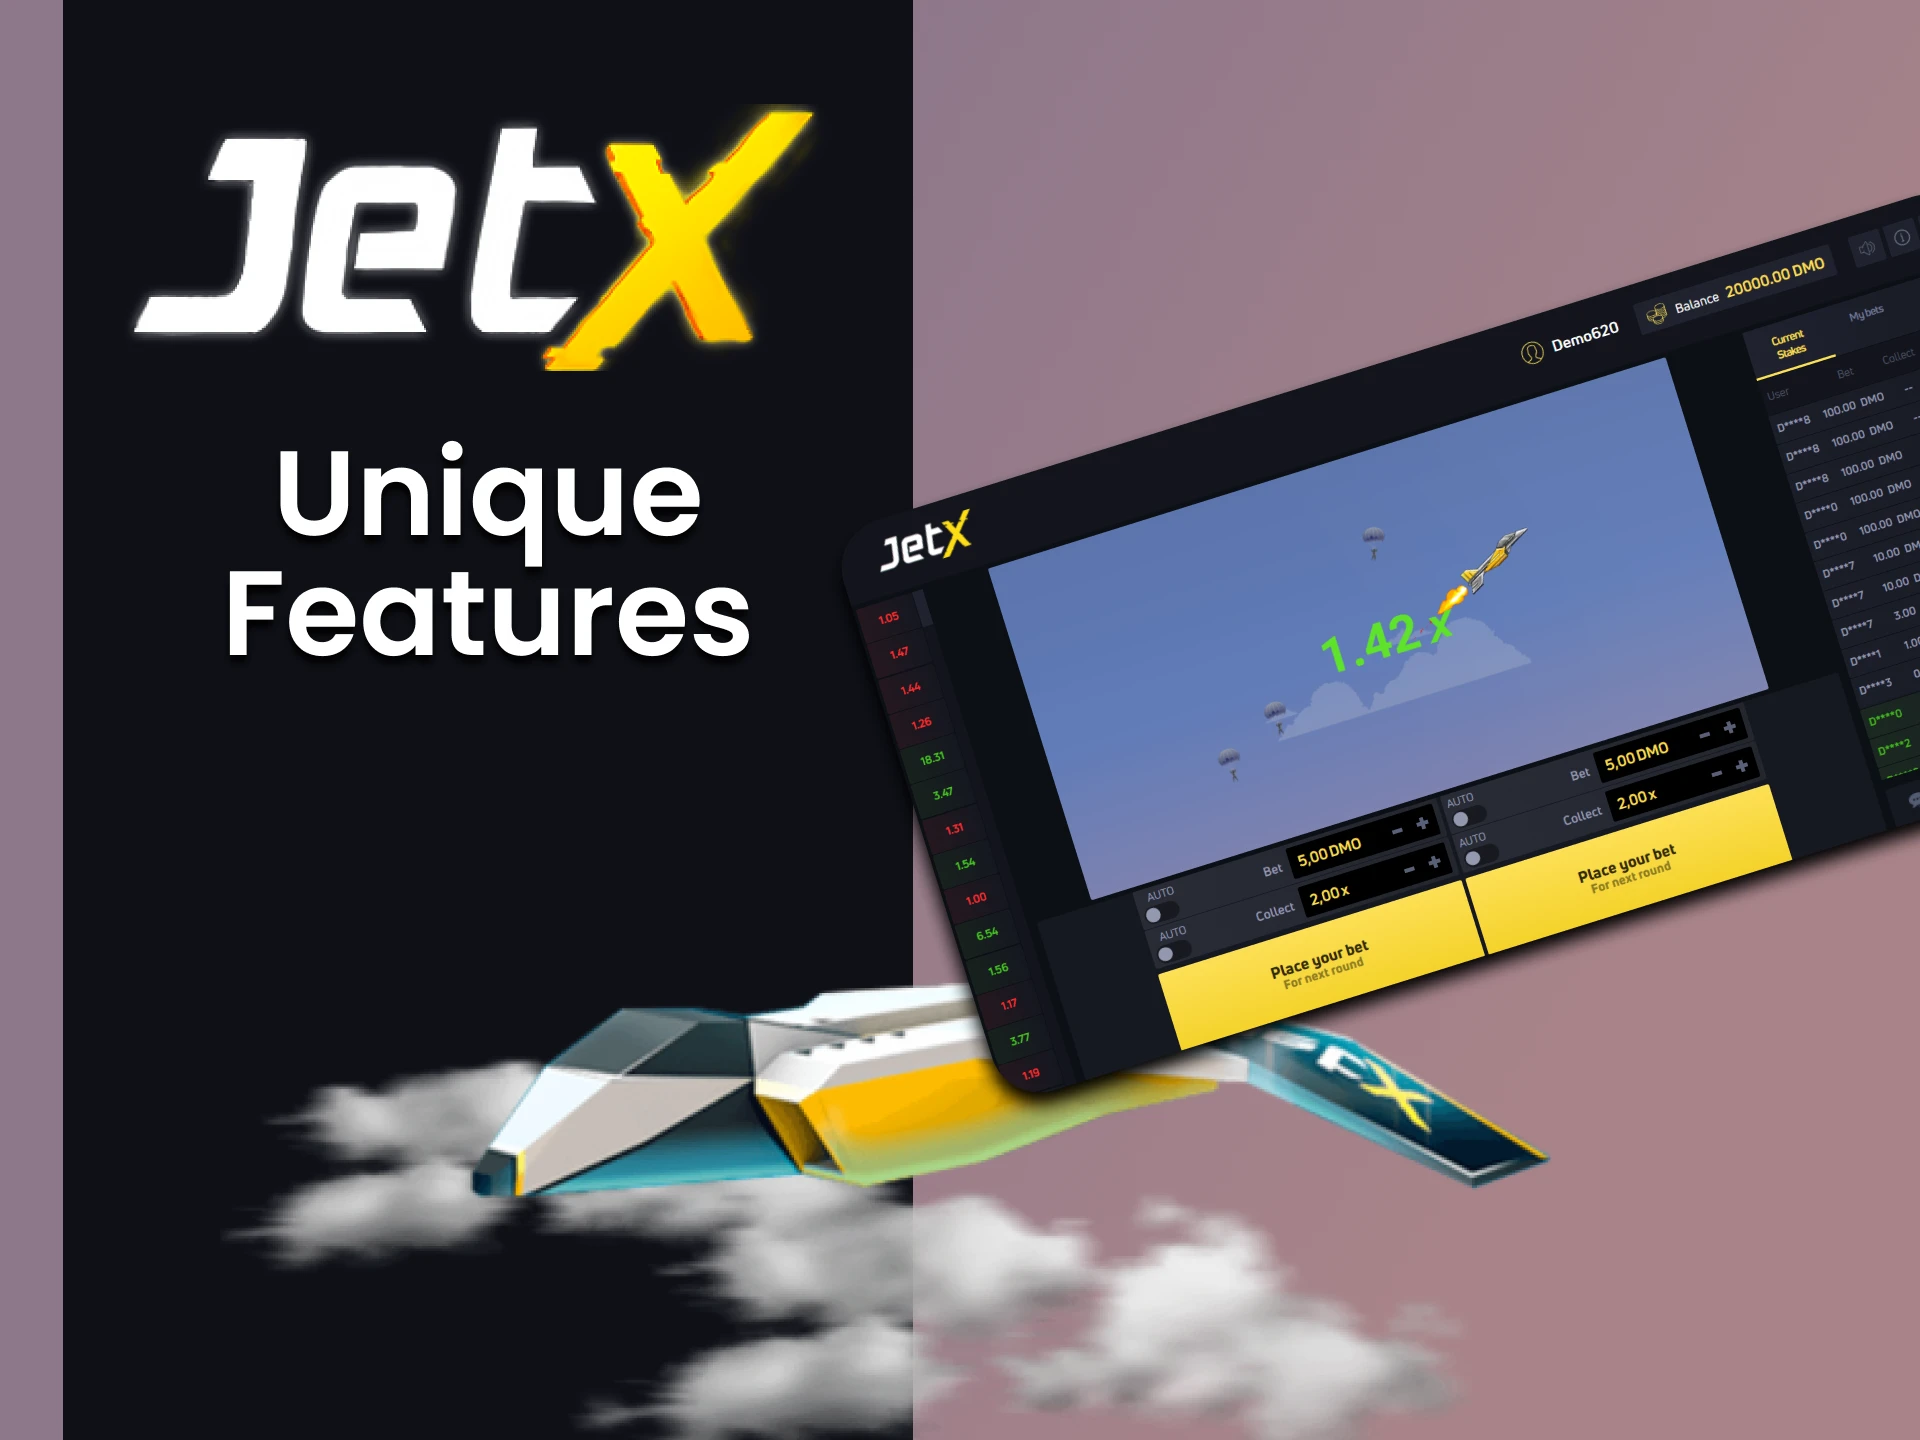 Find out what features JetX has to offer.